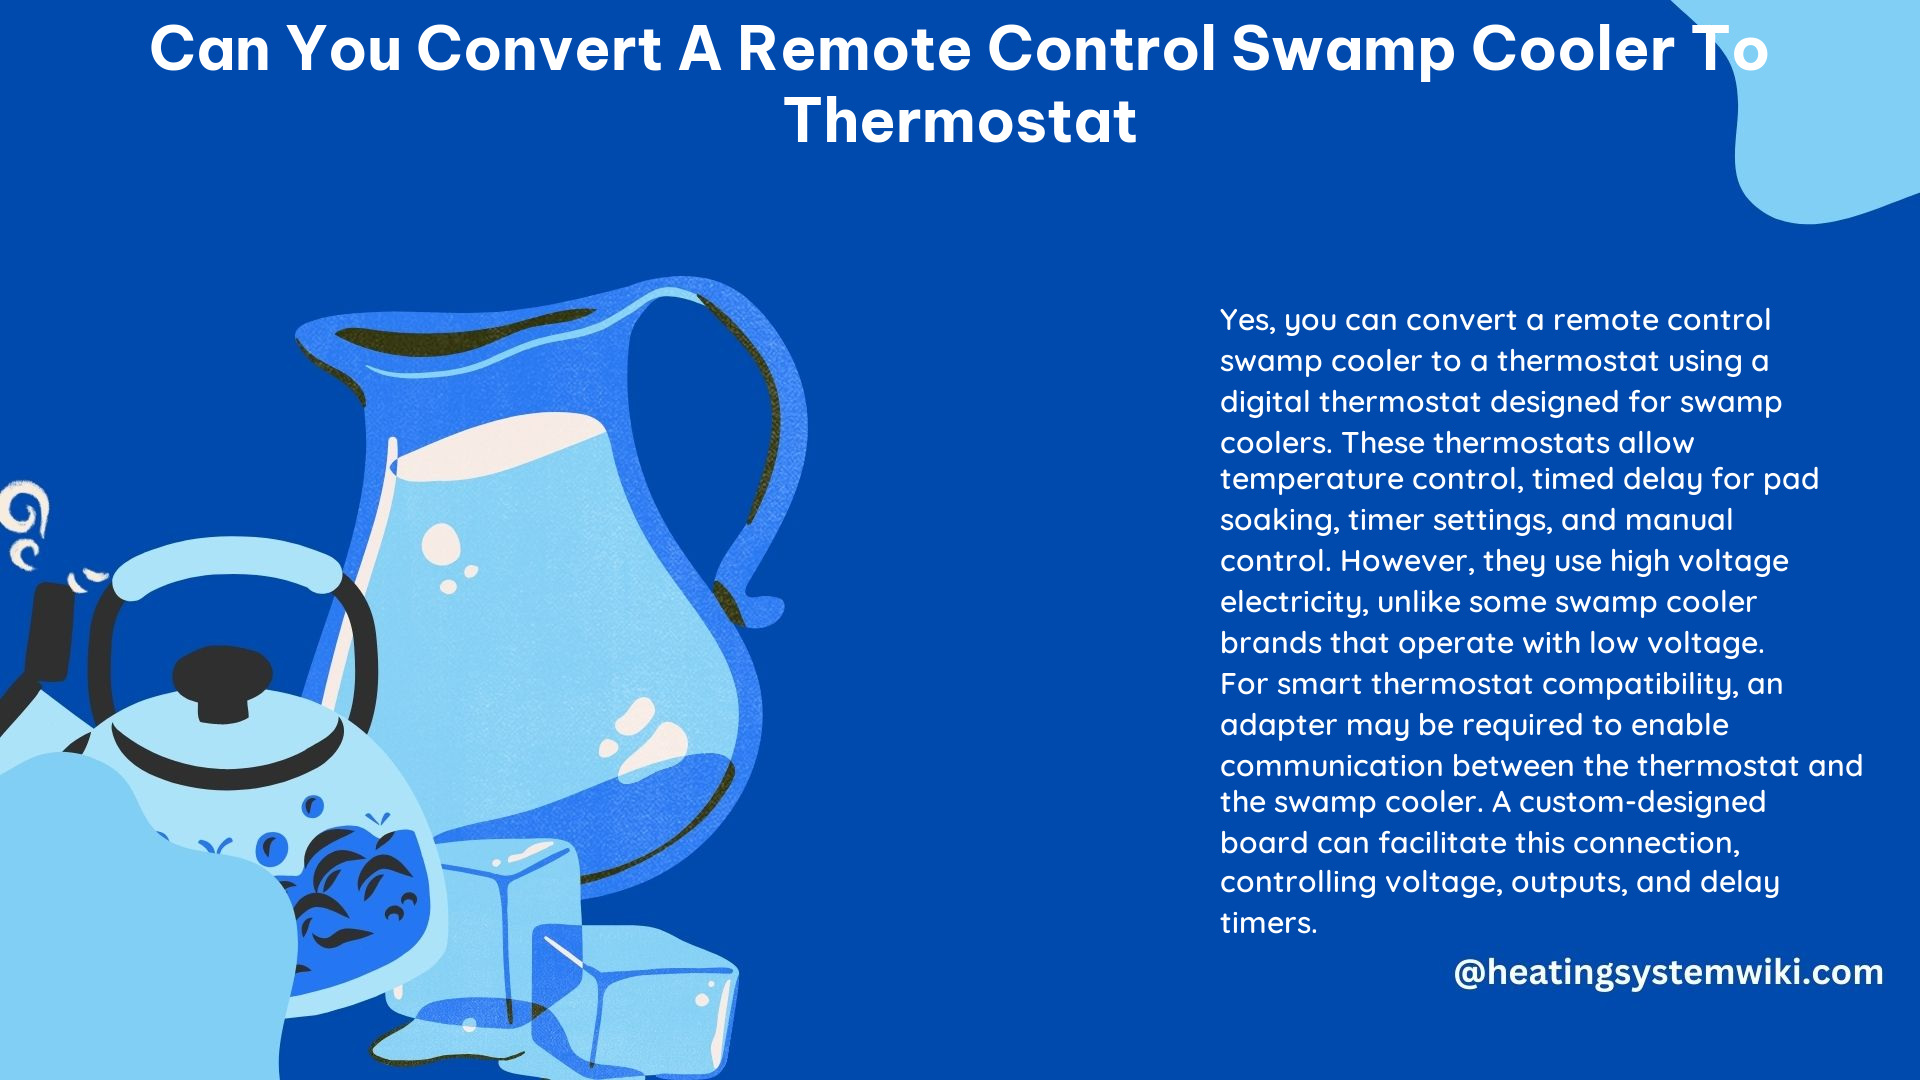 Can You Convert a Remote Control Swamp Cooler to Thermostat